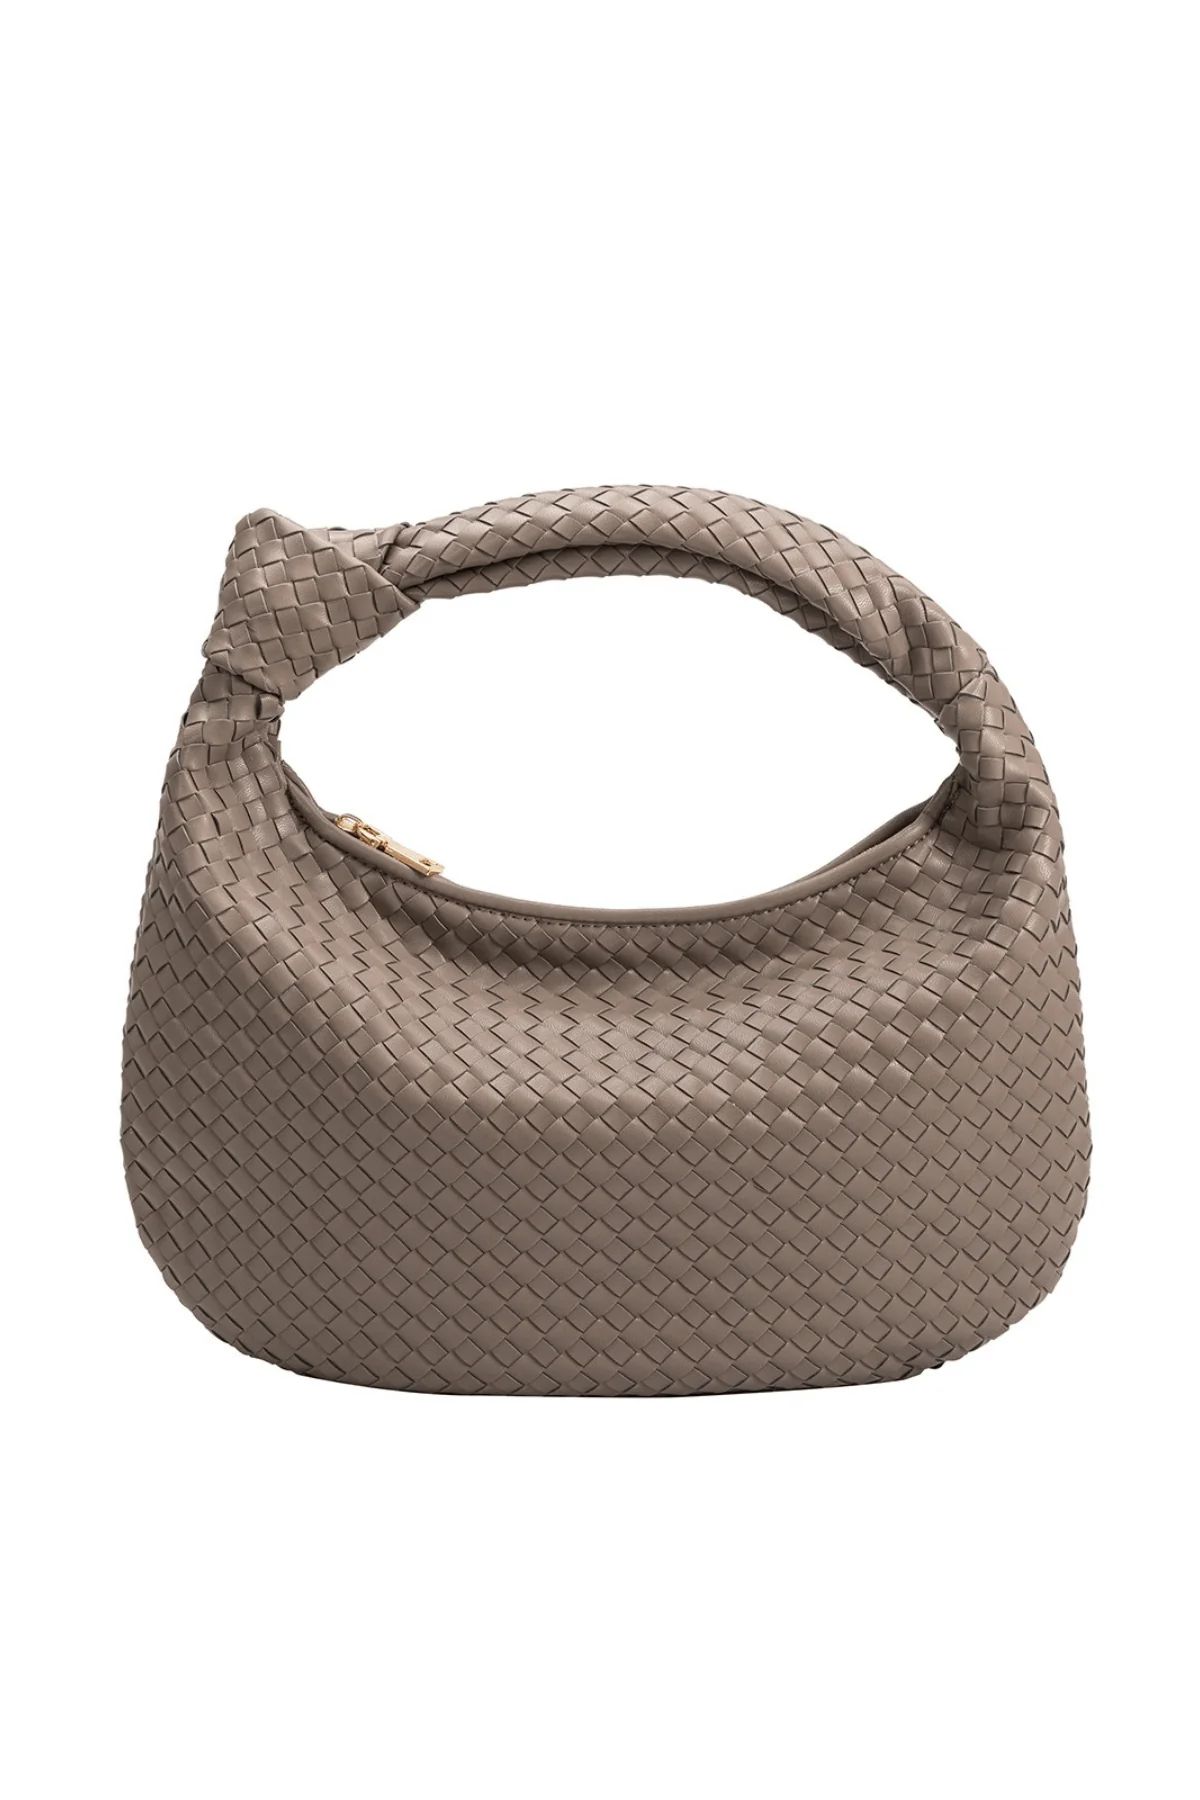 Melie Bianco Knotted Woven Vegan Leather Large Bag | Social Threads